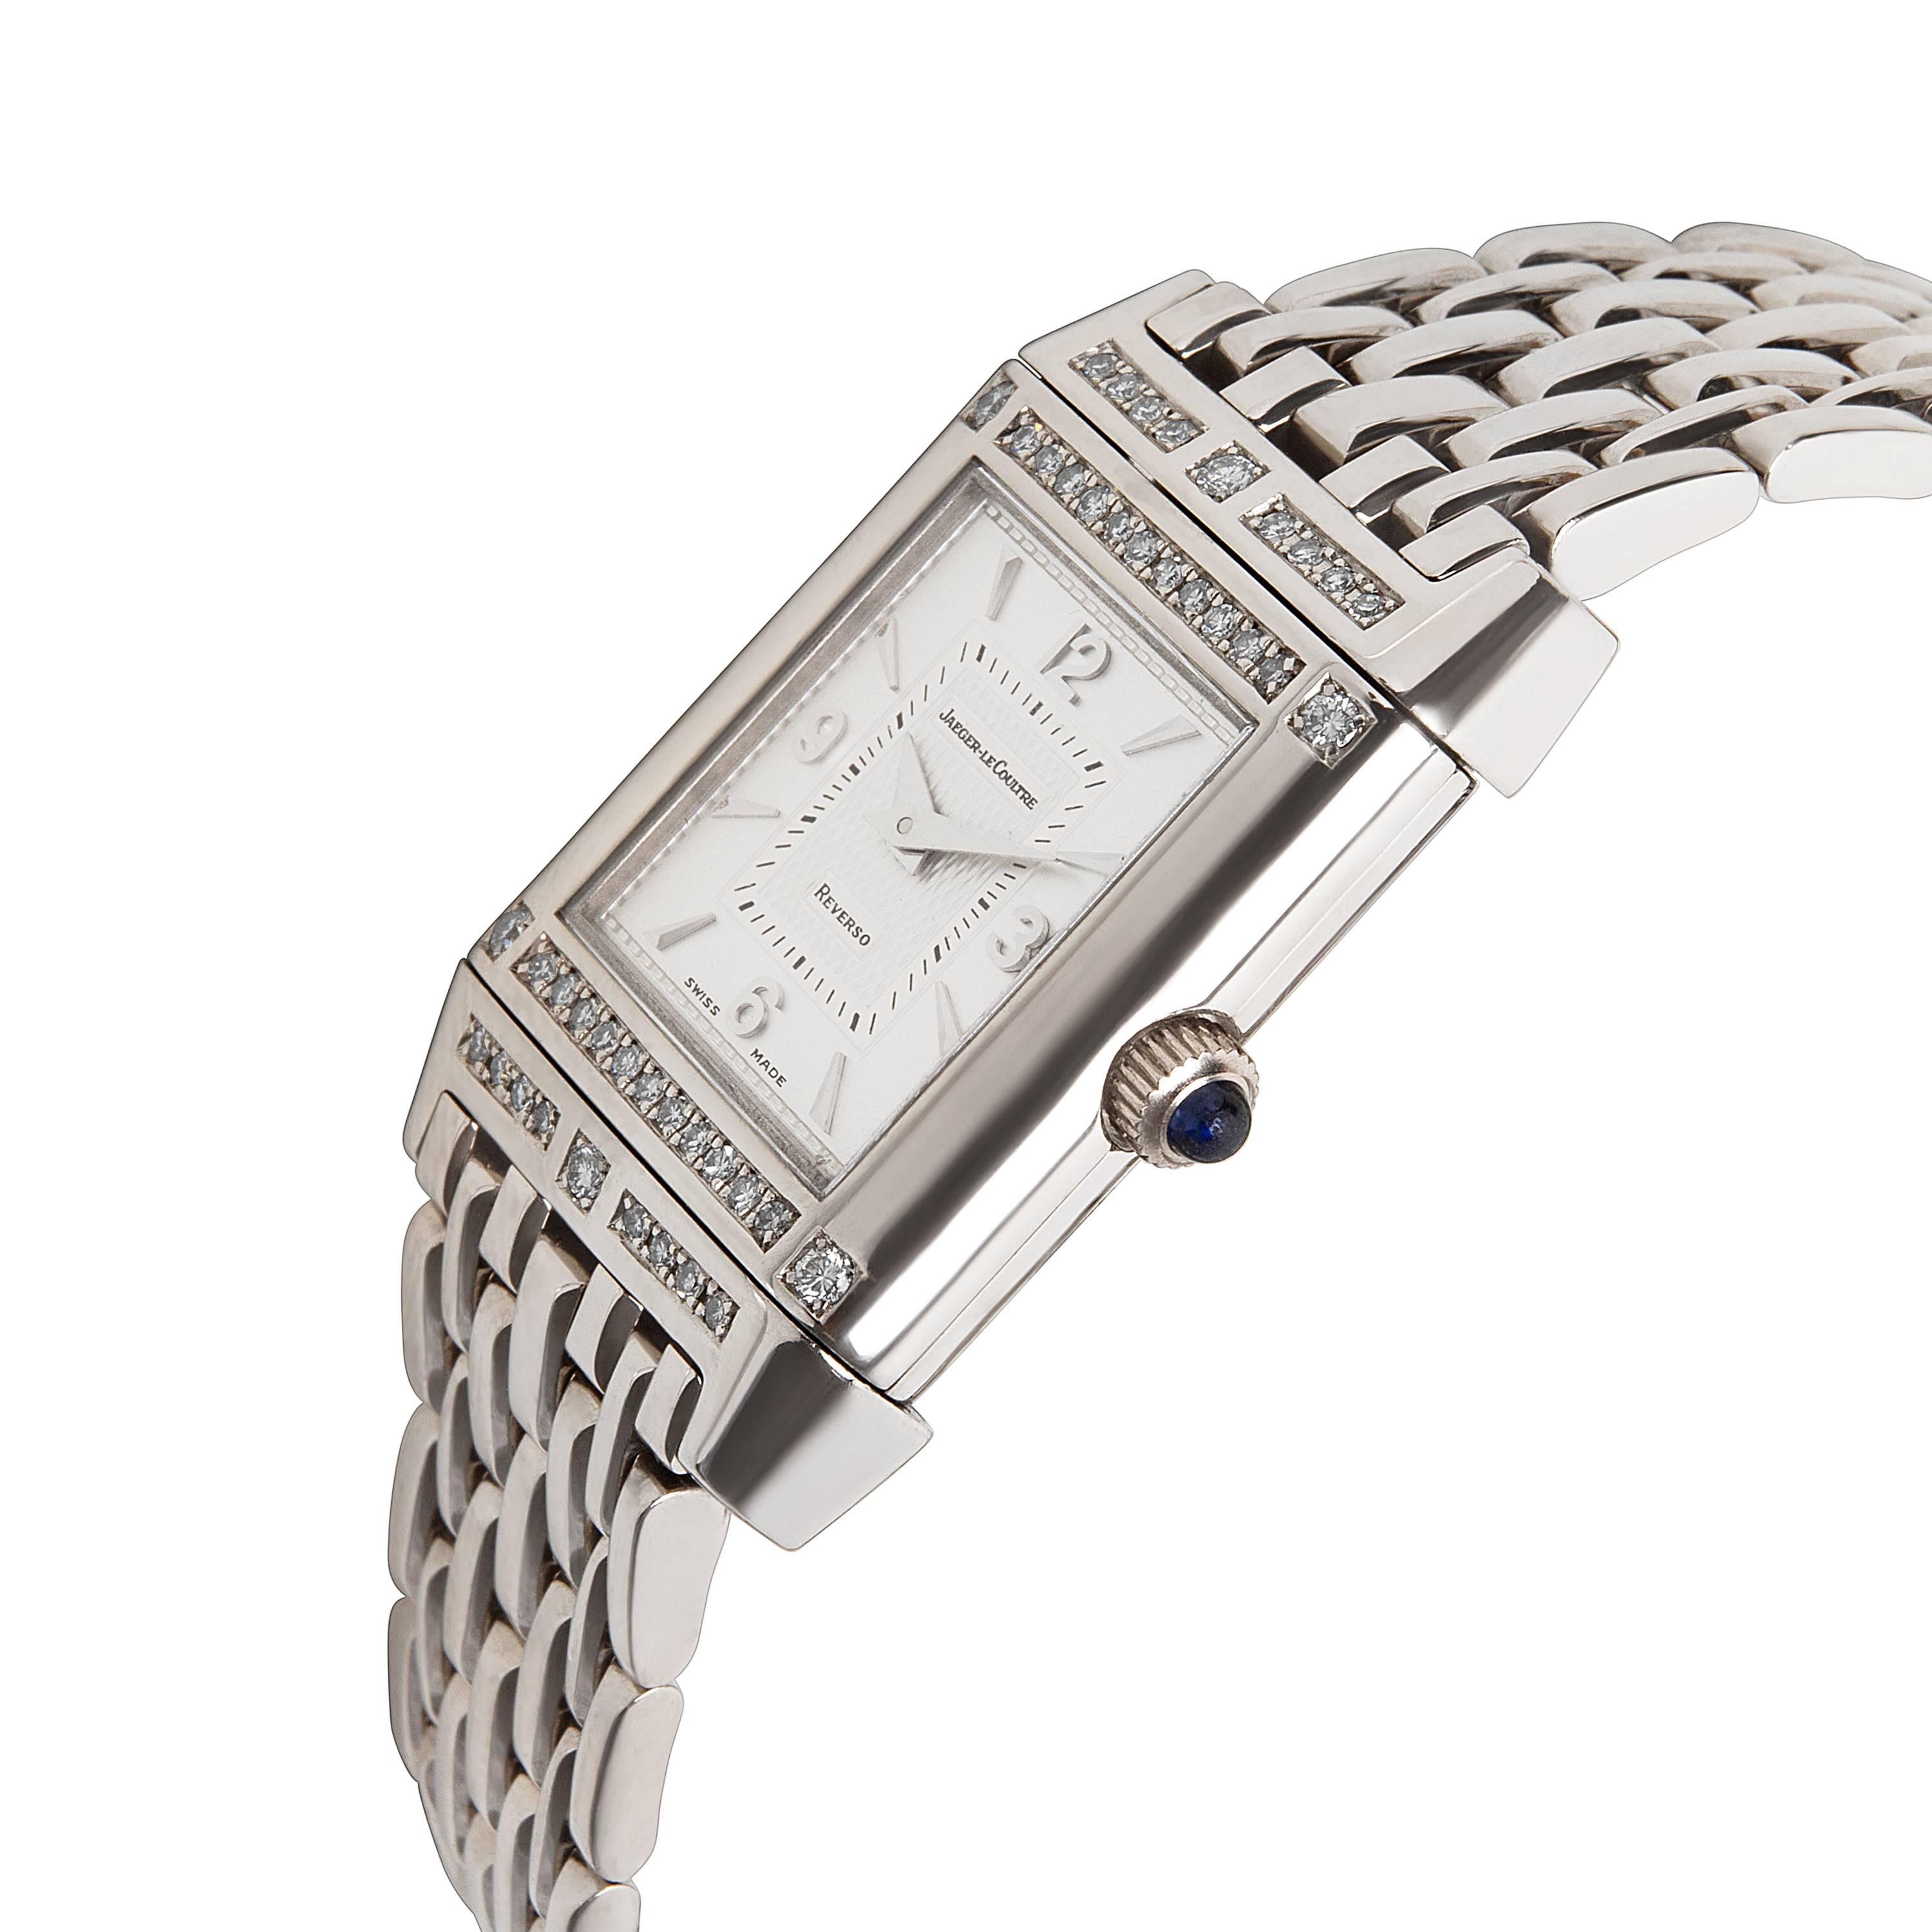 
Jaeger LeCoultre Reverso Women's Watch in 18K White Gold

PRIMARY DETAILS
Brand:  Jaeger-LeCoultre
Model: Reverso
Serial Number: ***
Country of Origin: Switzerland
Movement Type: Mechanical: Hand-winding
Year of Manufacture: 1990-1999
Condition: In